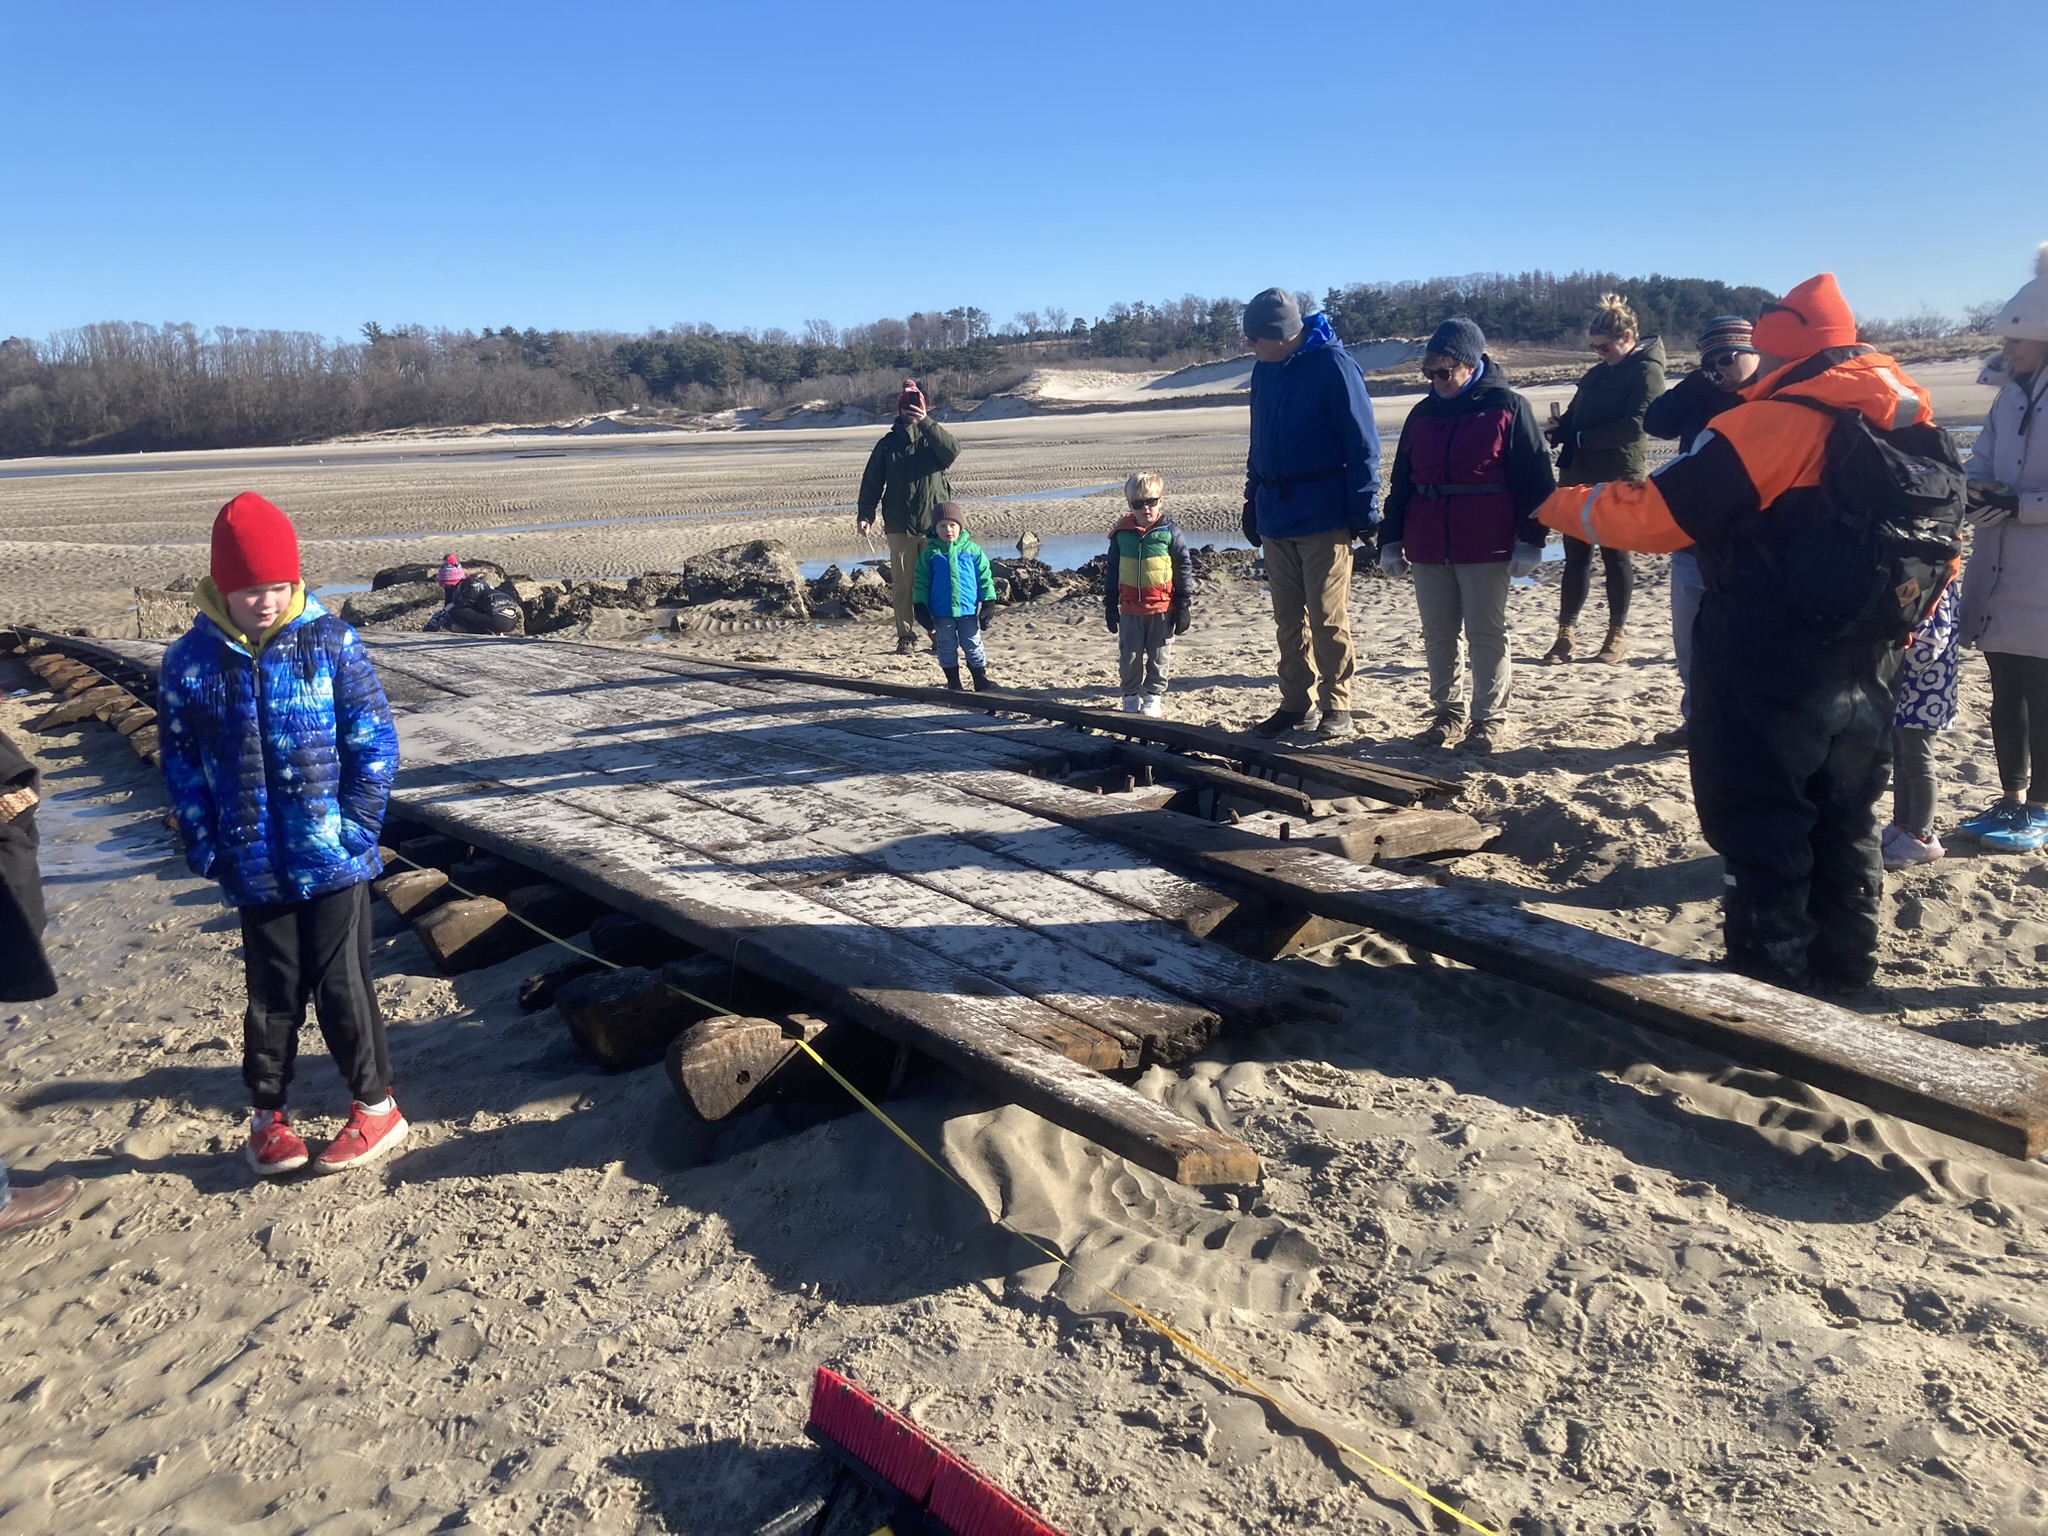 Several people look at an uncovered part of a shipwreck that rests on a sandy beach.